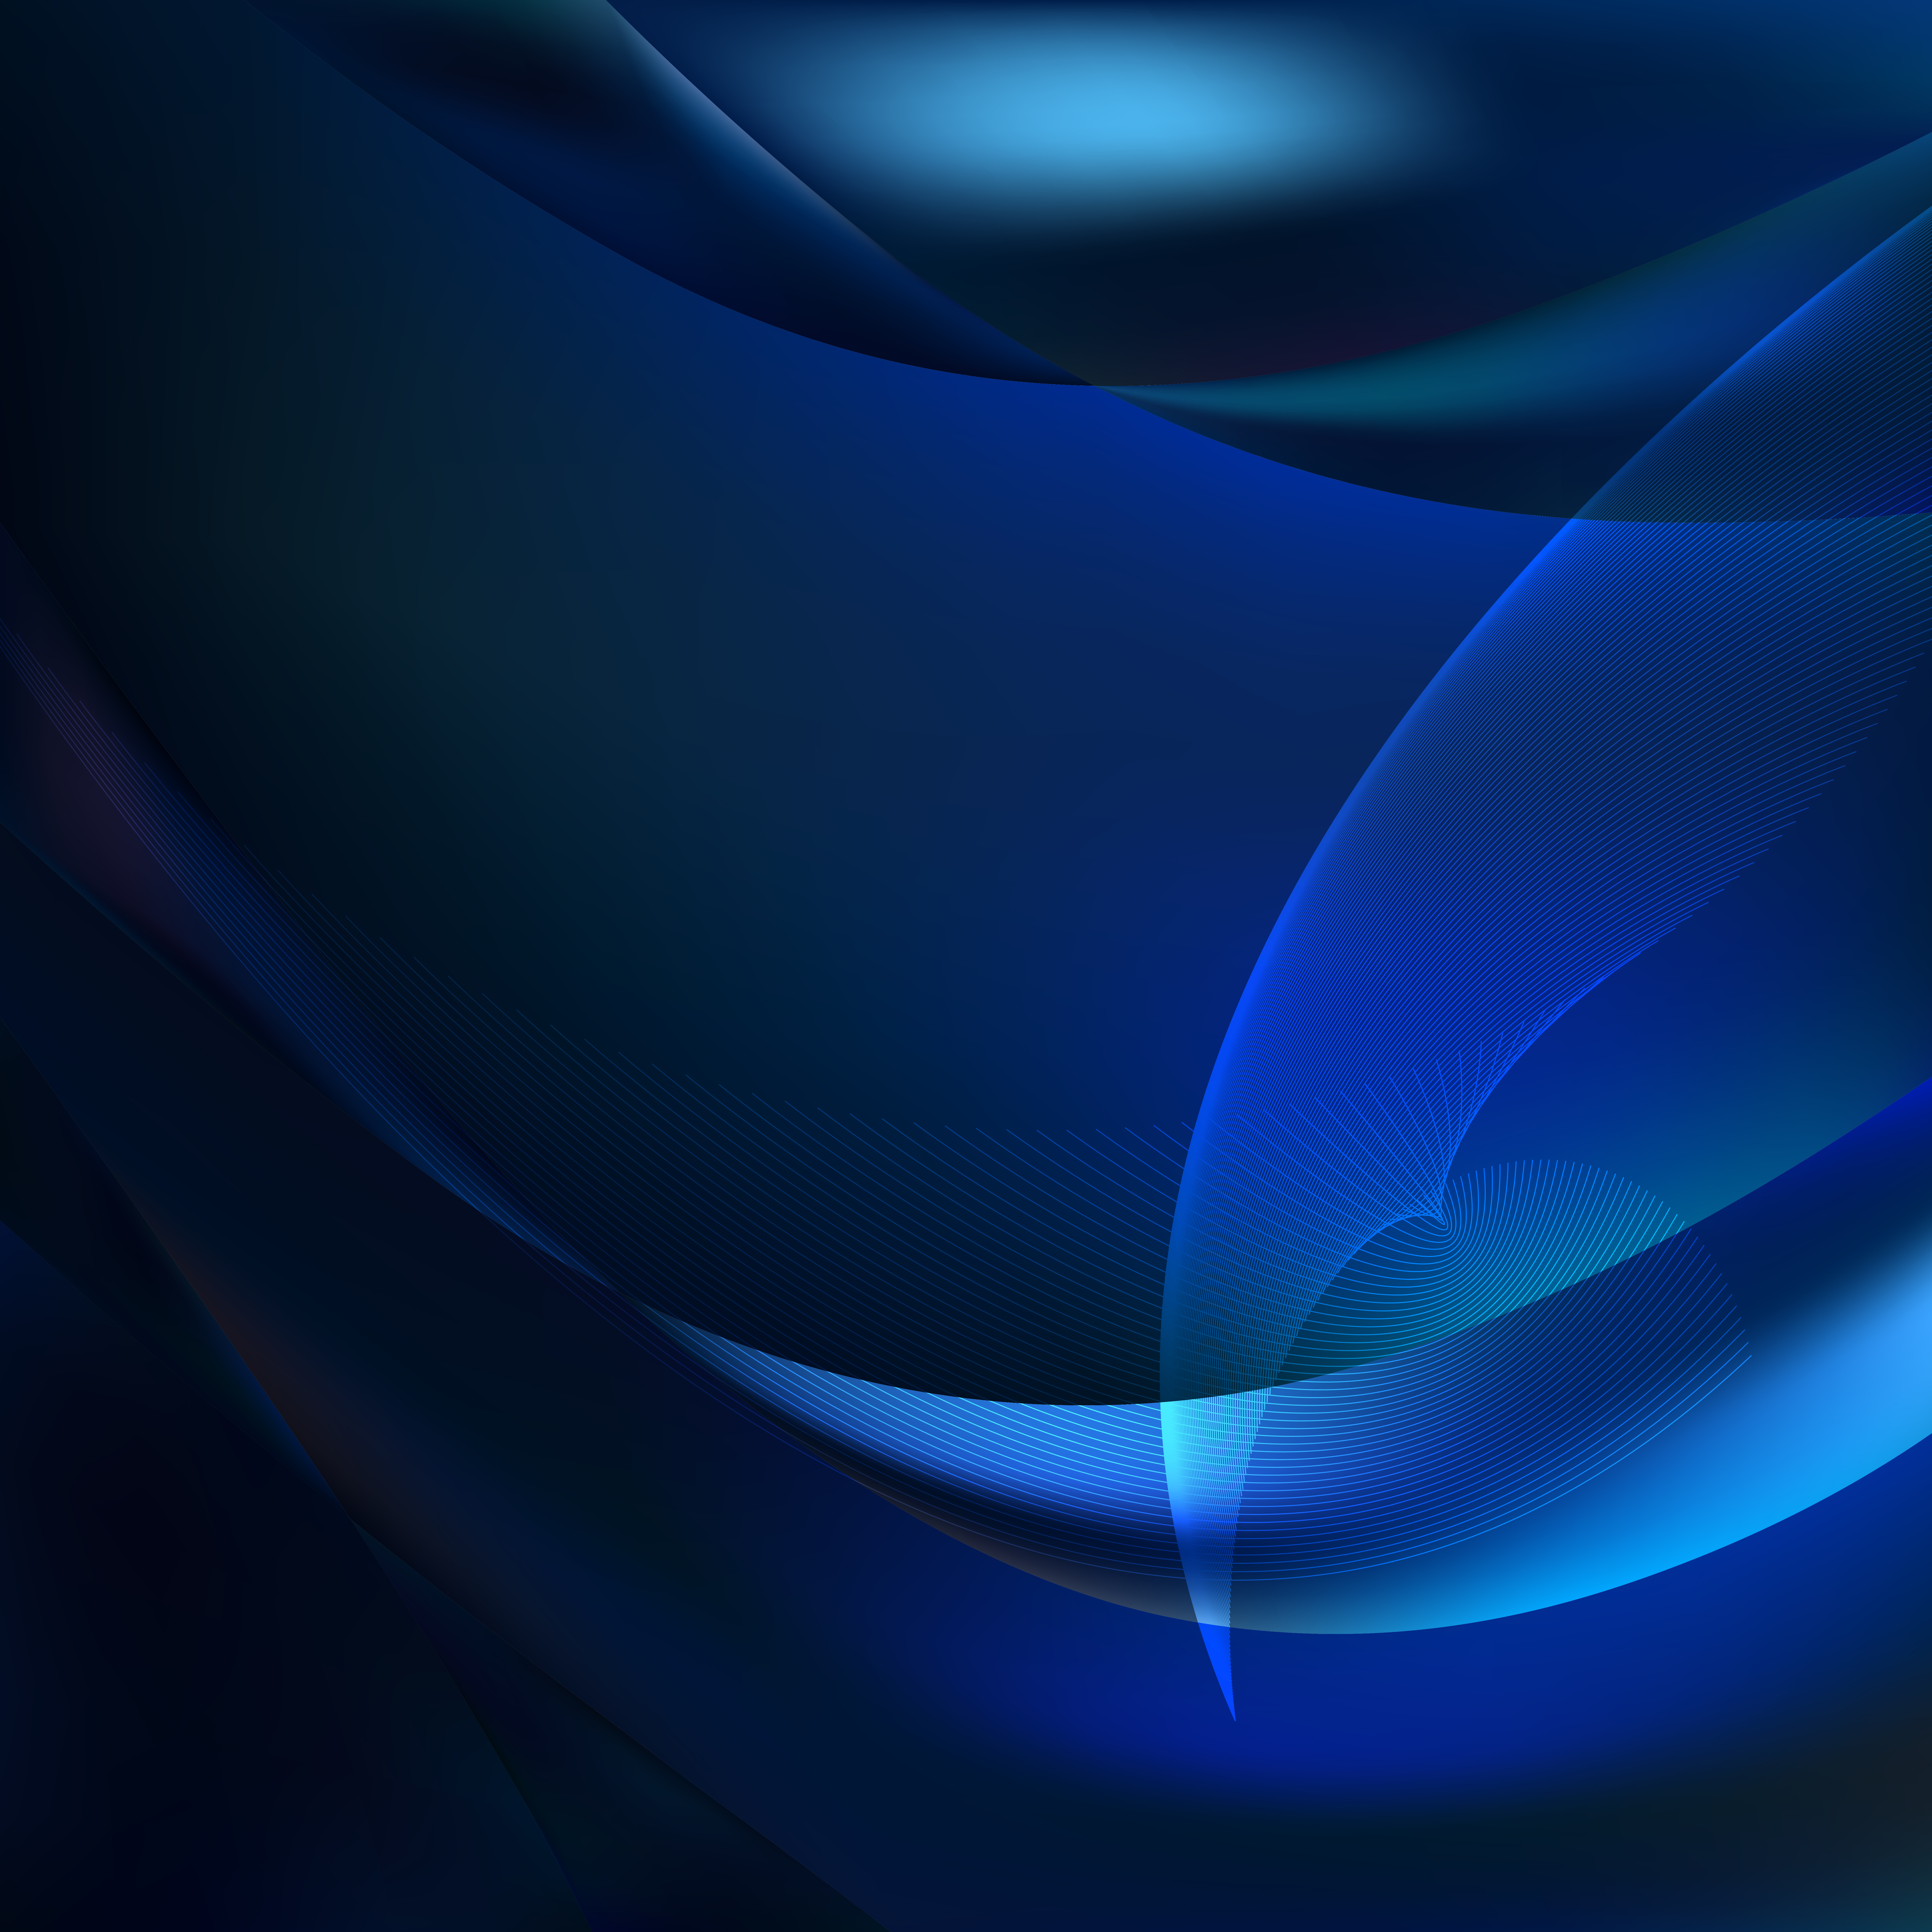 https://files.123freevectors.com/wp-content/original/148824-abstract-cool-blue-flow-curves-background.jpg